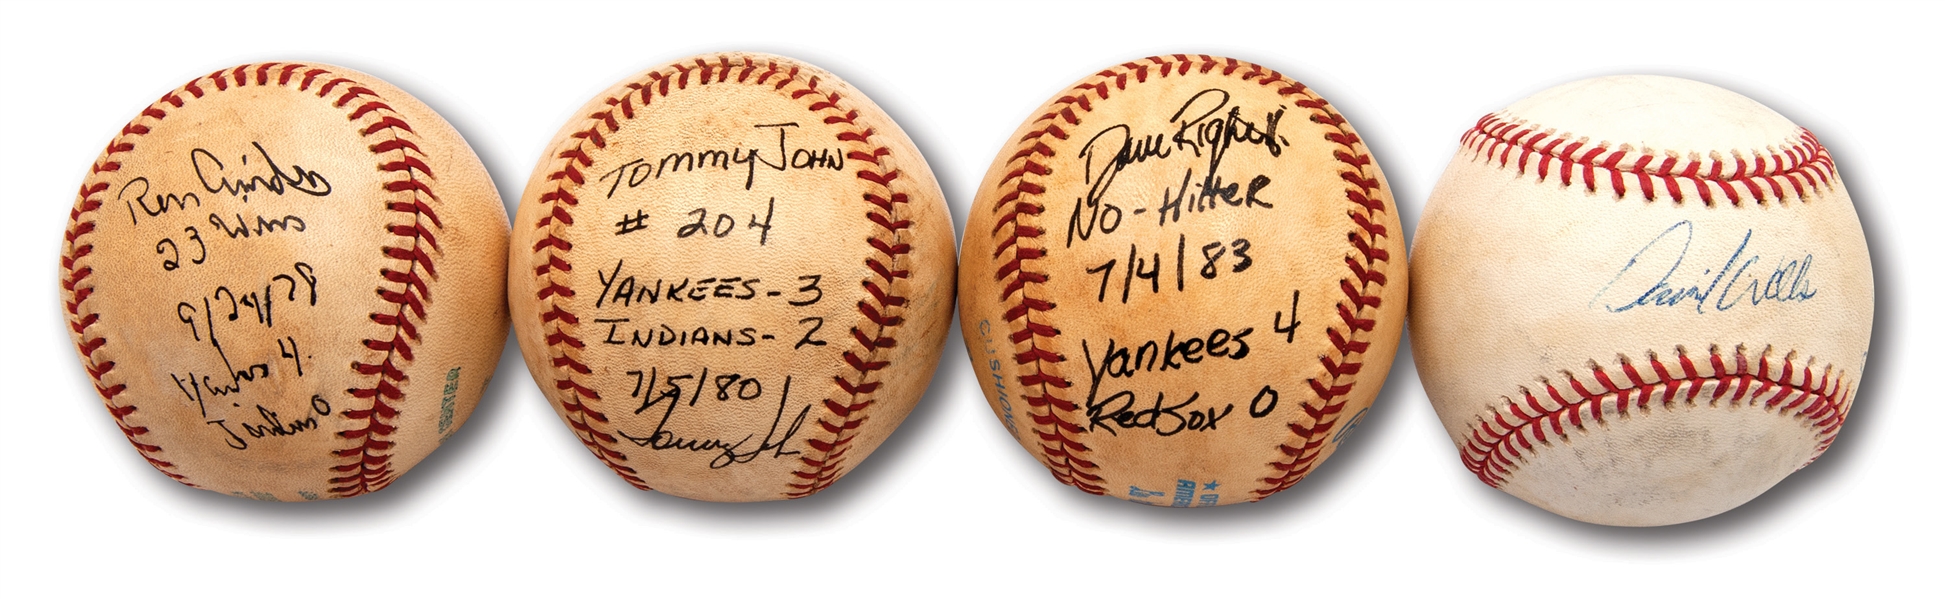 HISTORIC LOT OF (4) AUTOGRAPHED & INSCRIBED GAME USED BALLS FROM SIGNIFICANT YANKEES PITCHING ACHIEVEMENTS INCL. WELLS (PG), RIGHETTI (NH) & GUIDRY (SO)